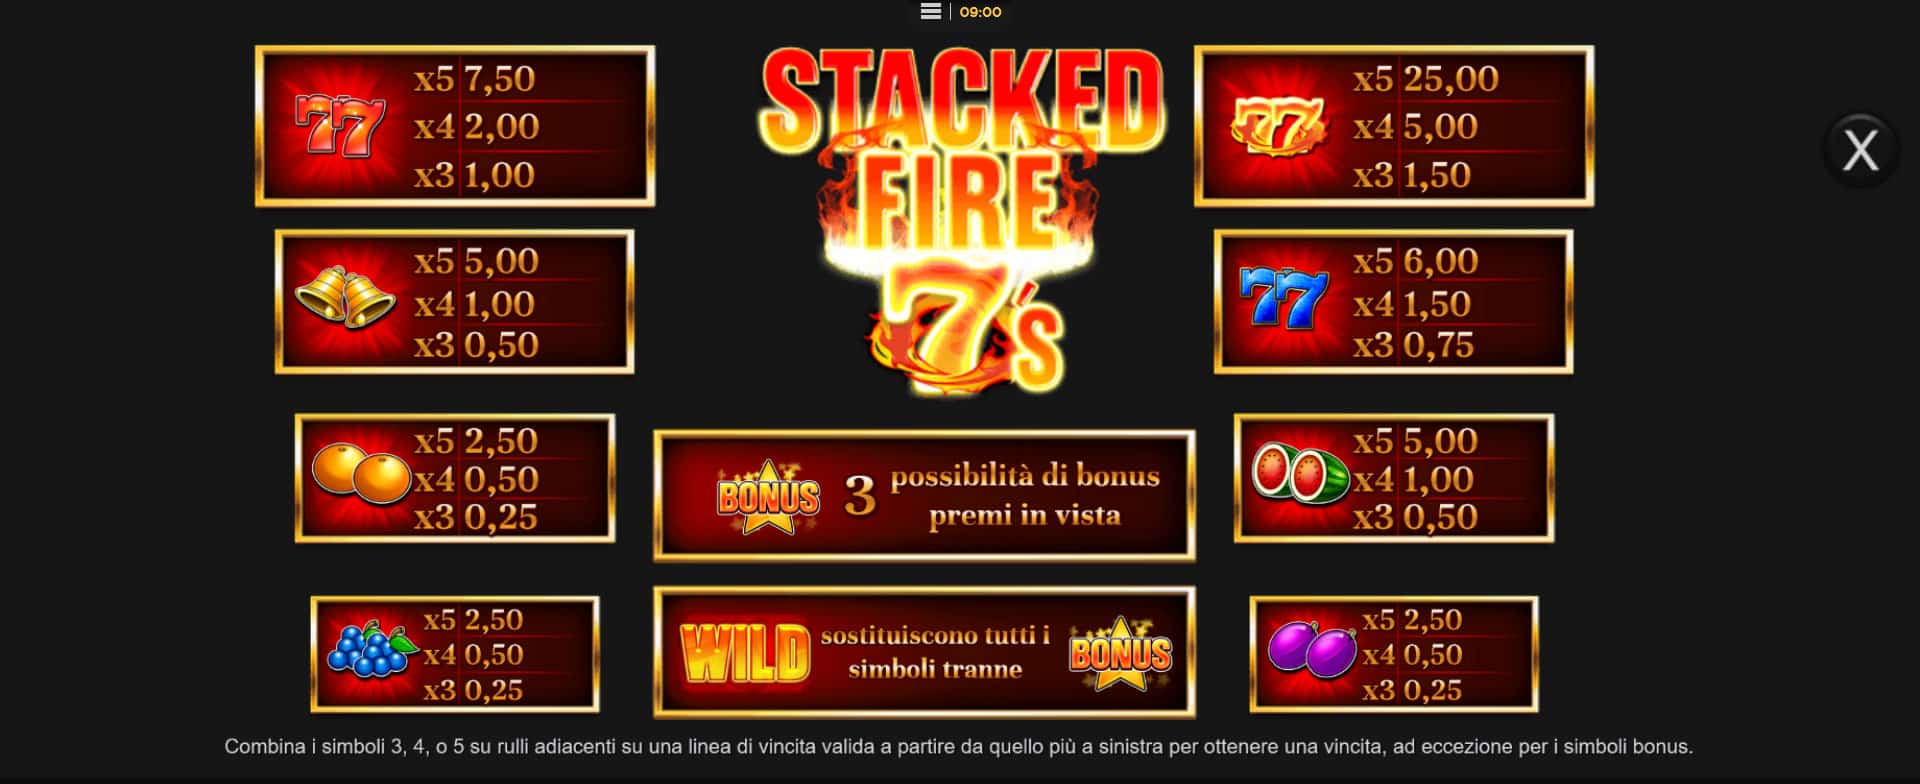 paytable della slot machine stacked fire 7s